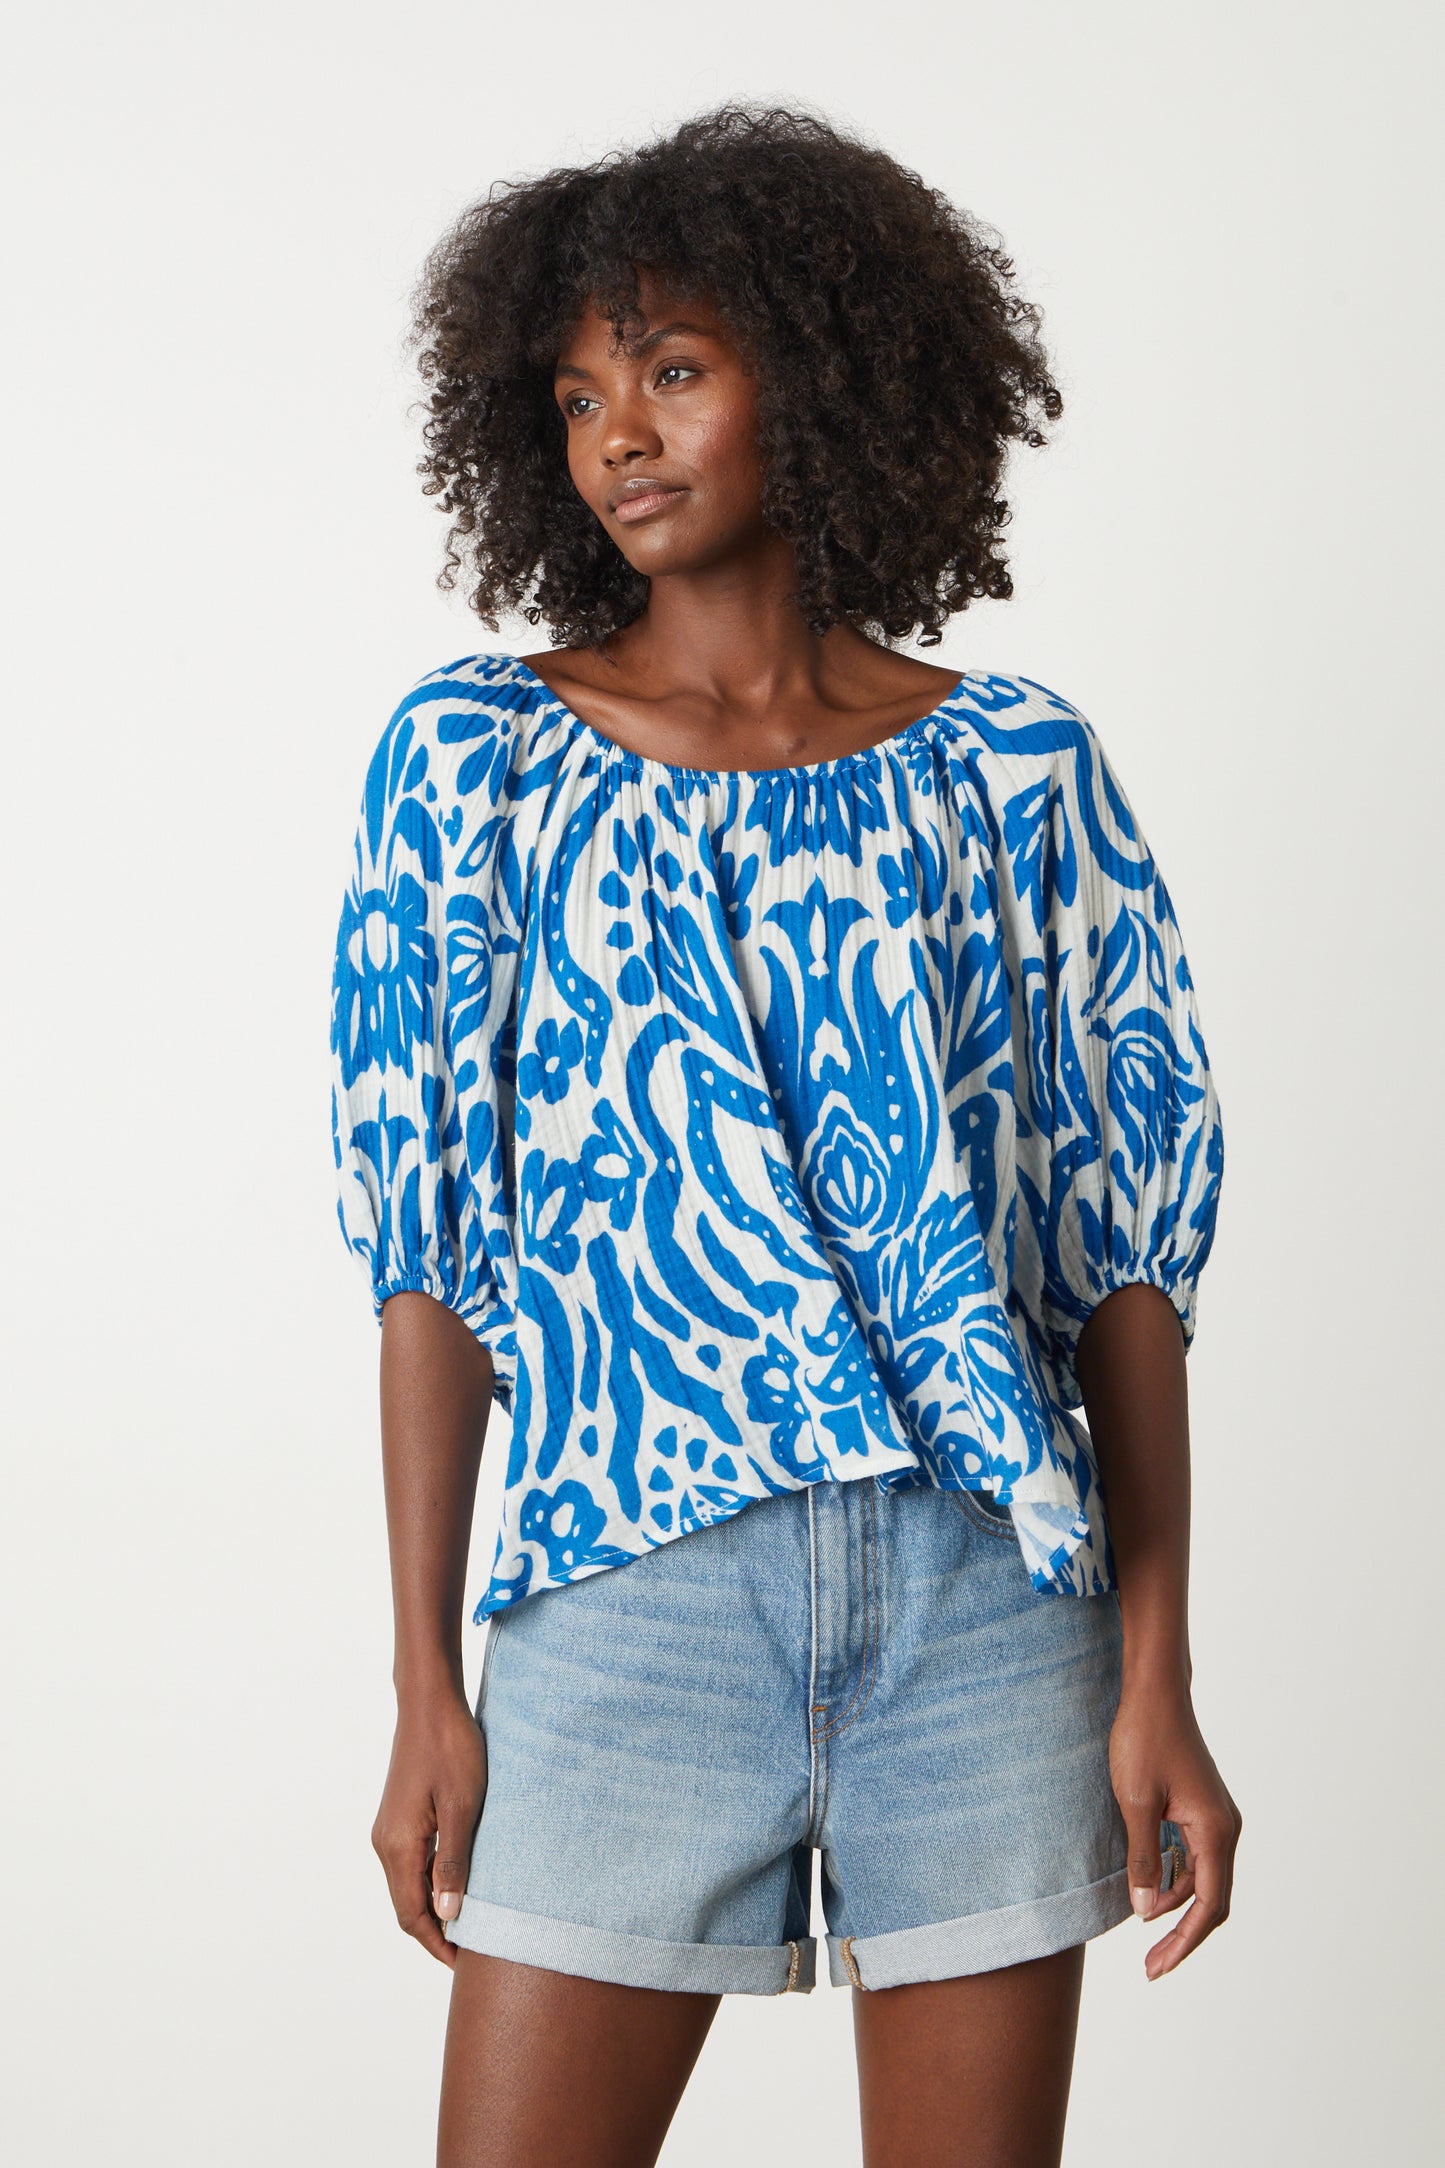 The model is wearing a Velvet by Graham & Spencer Candice Printed Cotton Gauze Top in bold blue and white print with denim shorts-26577386799297